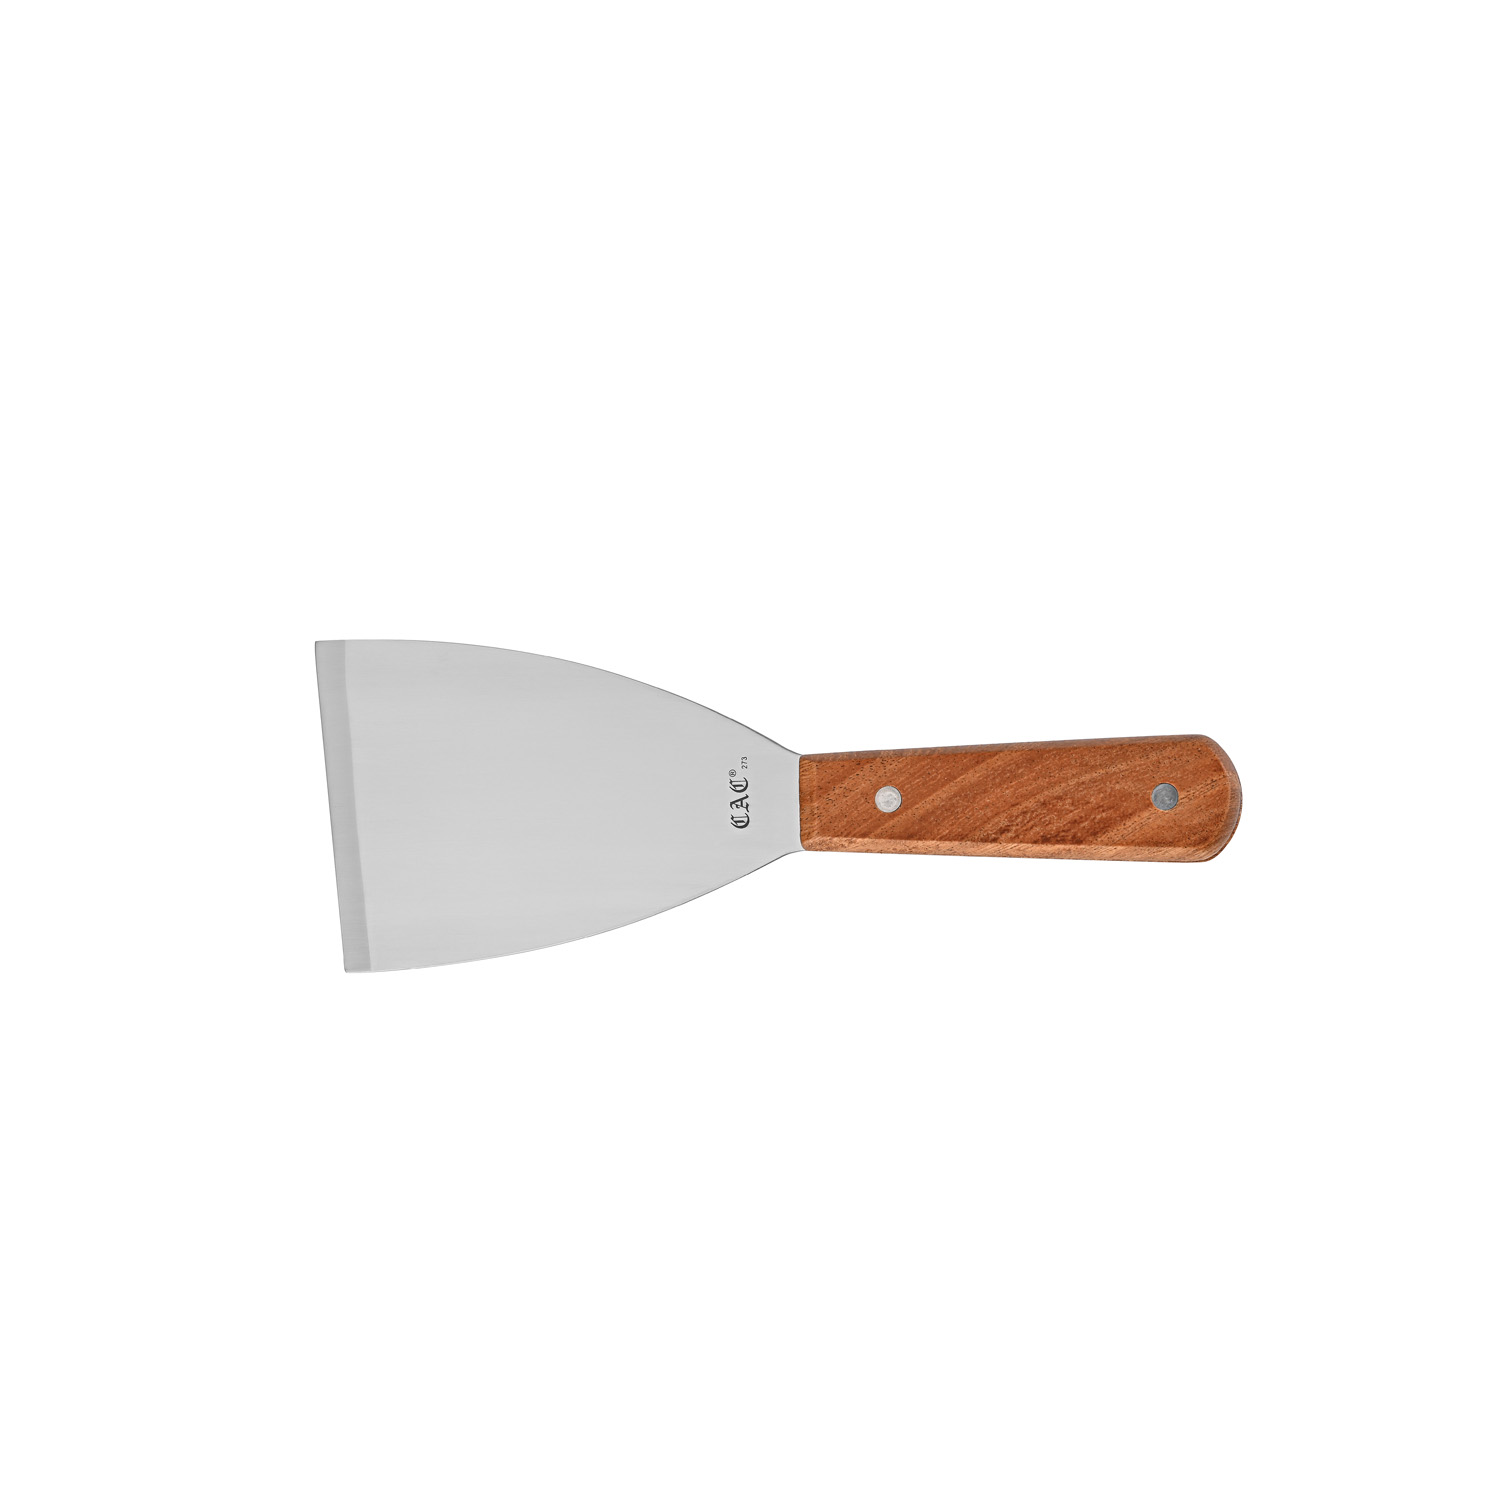 CAC China TNRW-SC53 Small Scraper Grill with Wood Handle 4-1/2"